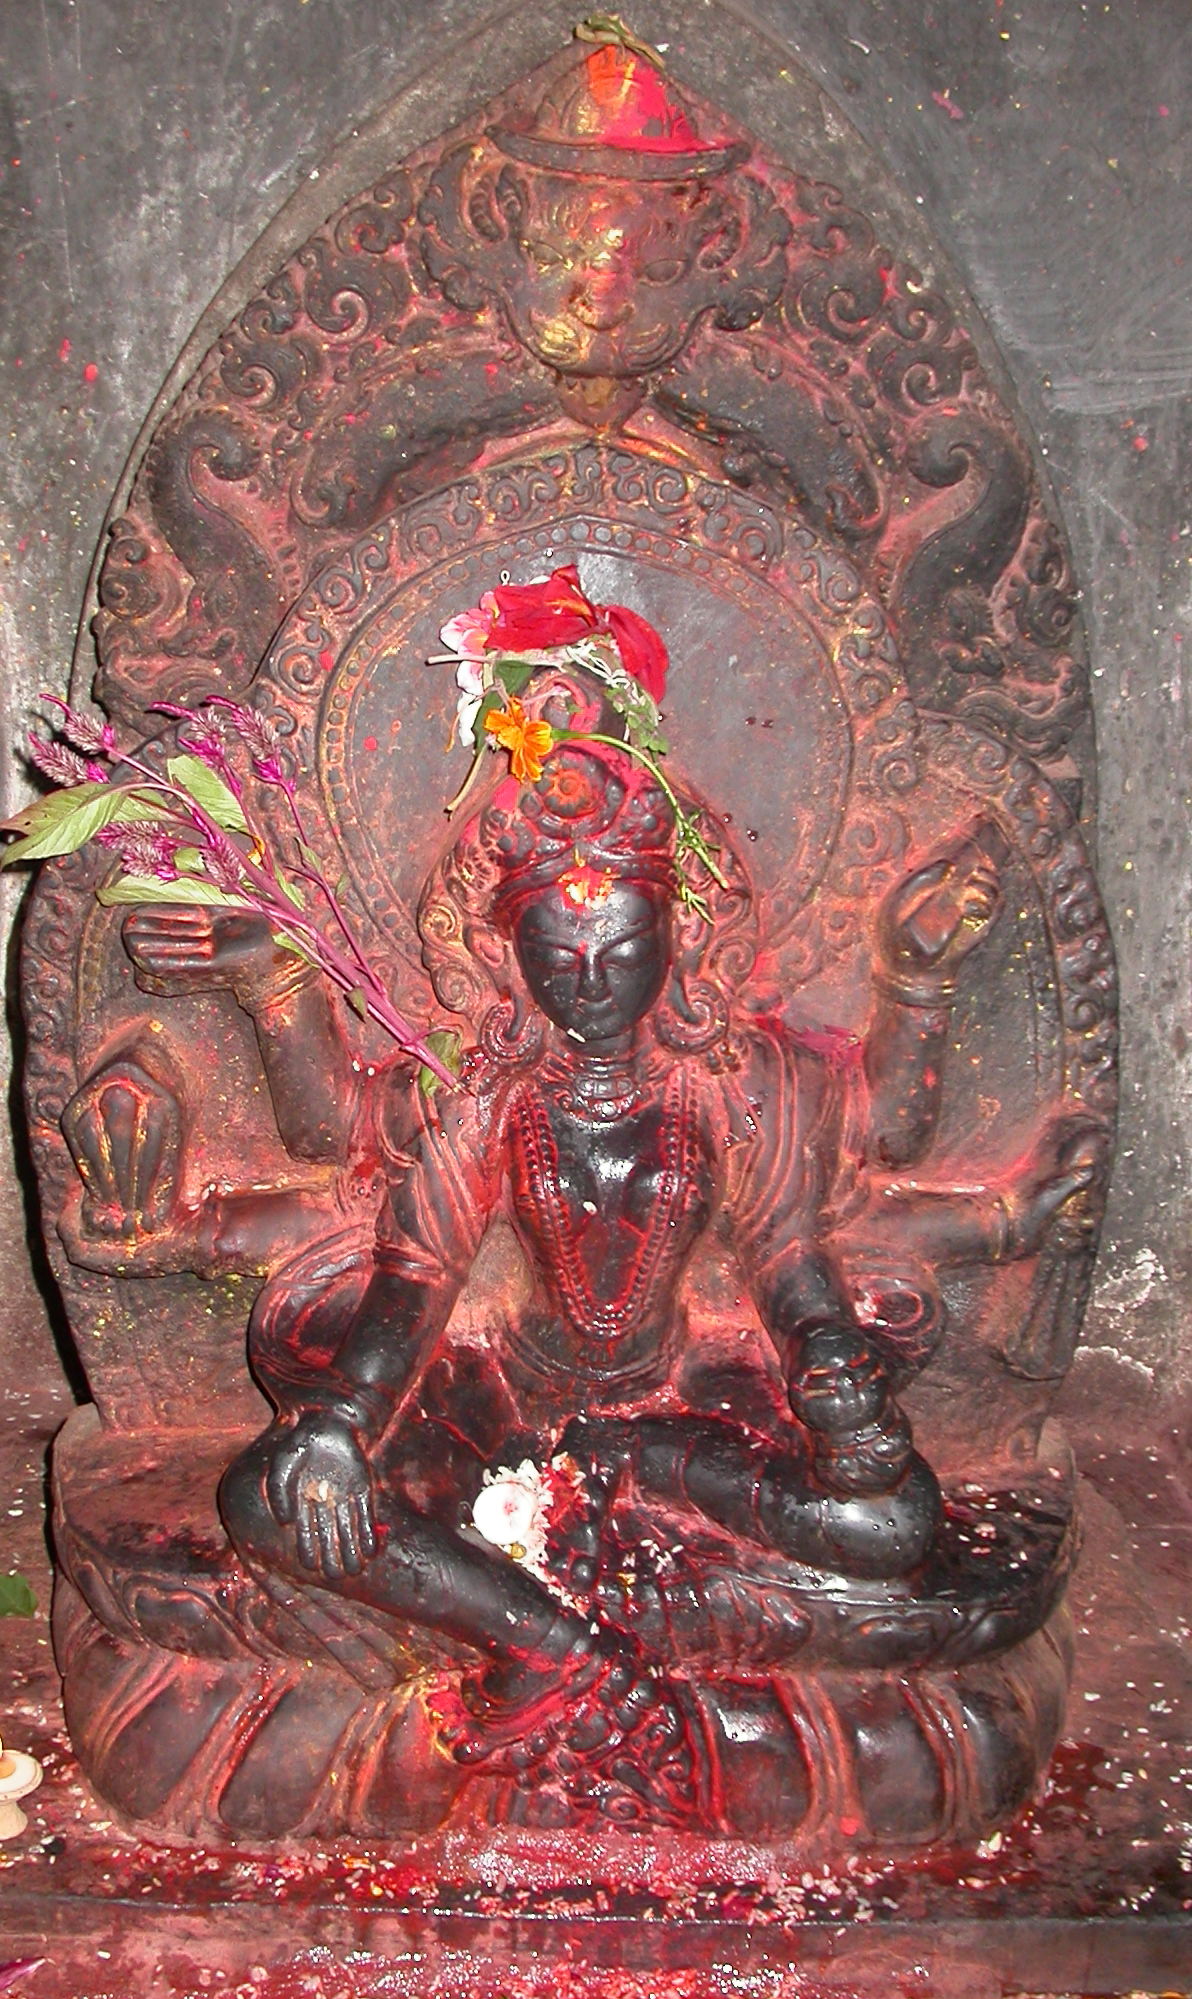 Dark stone sculpture of six-armed deity anointed with offerings of pigment and flowers